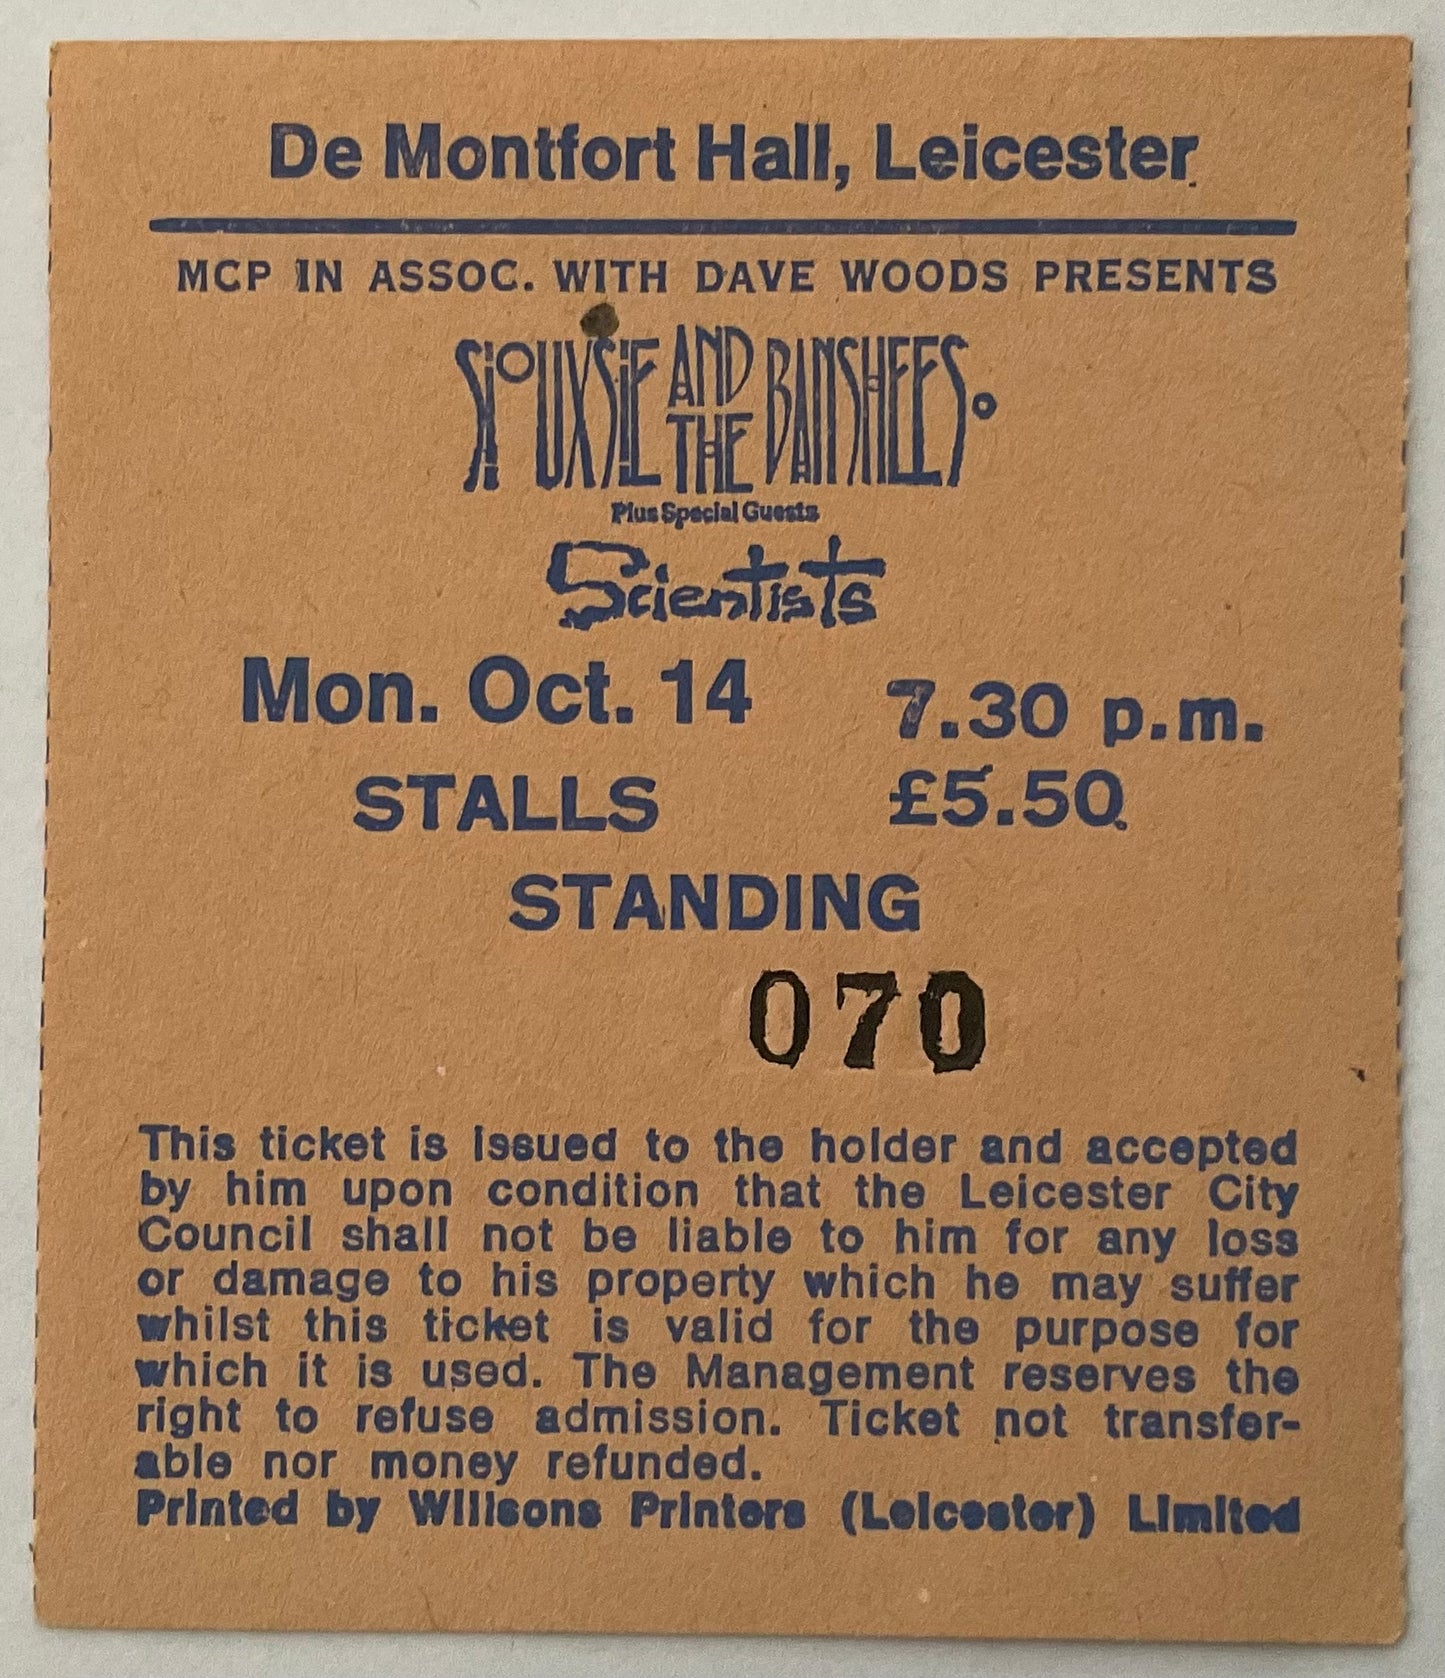 Siouxsie & the Banshees Original Used Concert Ticket De Montfort Hall Leicester 14th Oct 1985